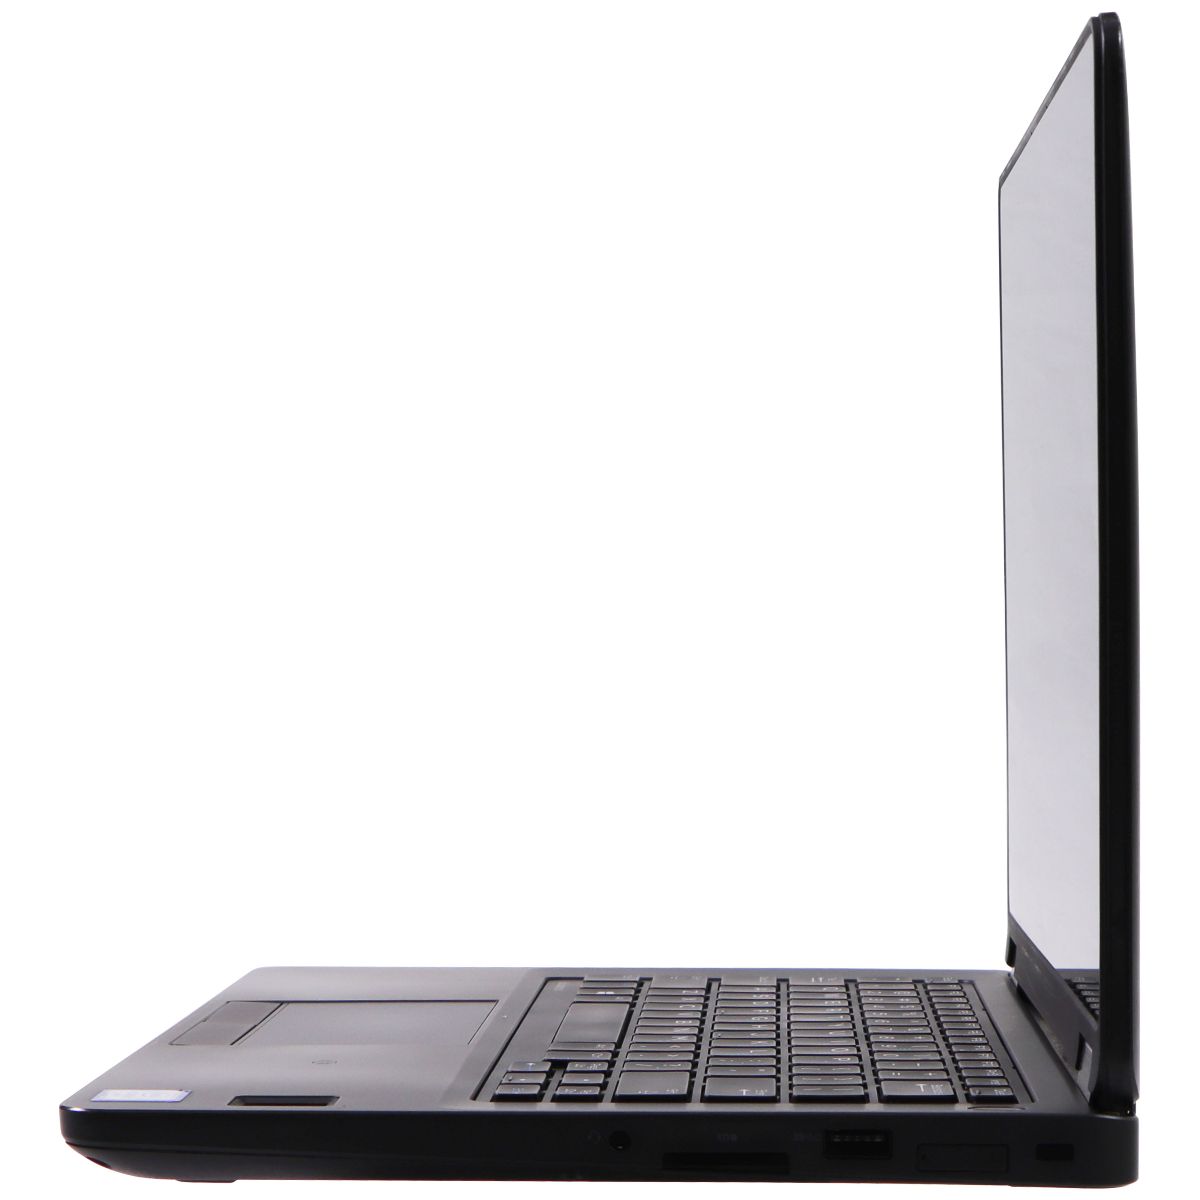 Dell Latitude E5270 (12.5-in) FHD Touch Laptop (P23T) i5-6300U/256GB/8GB/10 Pro Laptops - PC Laptops & Netbooks Dell    - Simple Cell Bulk Wholesale Pricing - USA Seller